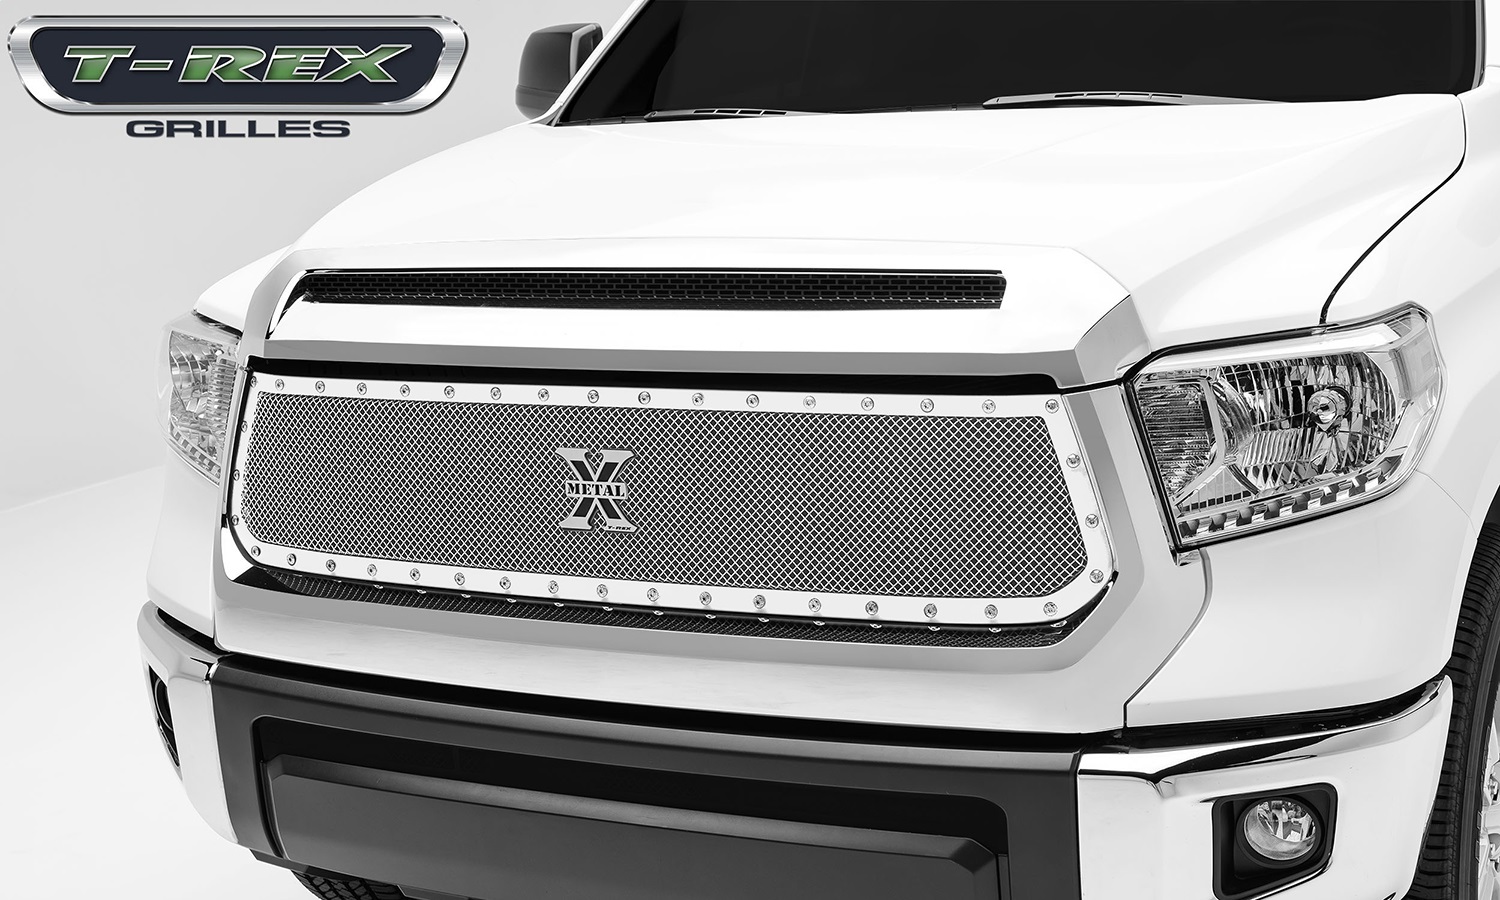 T-Rex Grilles T-Rex Grilles 6719640 X-Metal Series; Mesh Grille Assembly Fits 14-15 Tundra